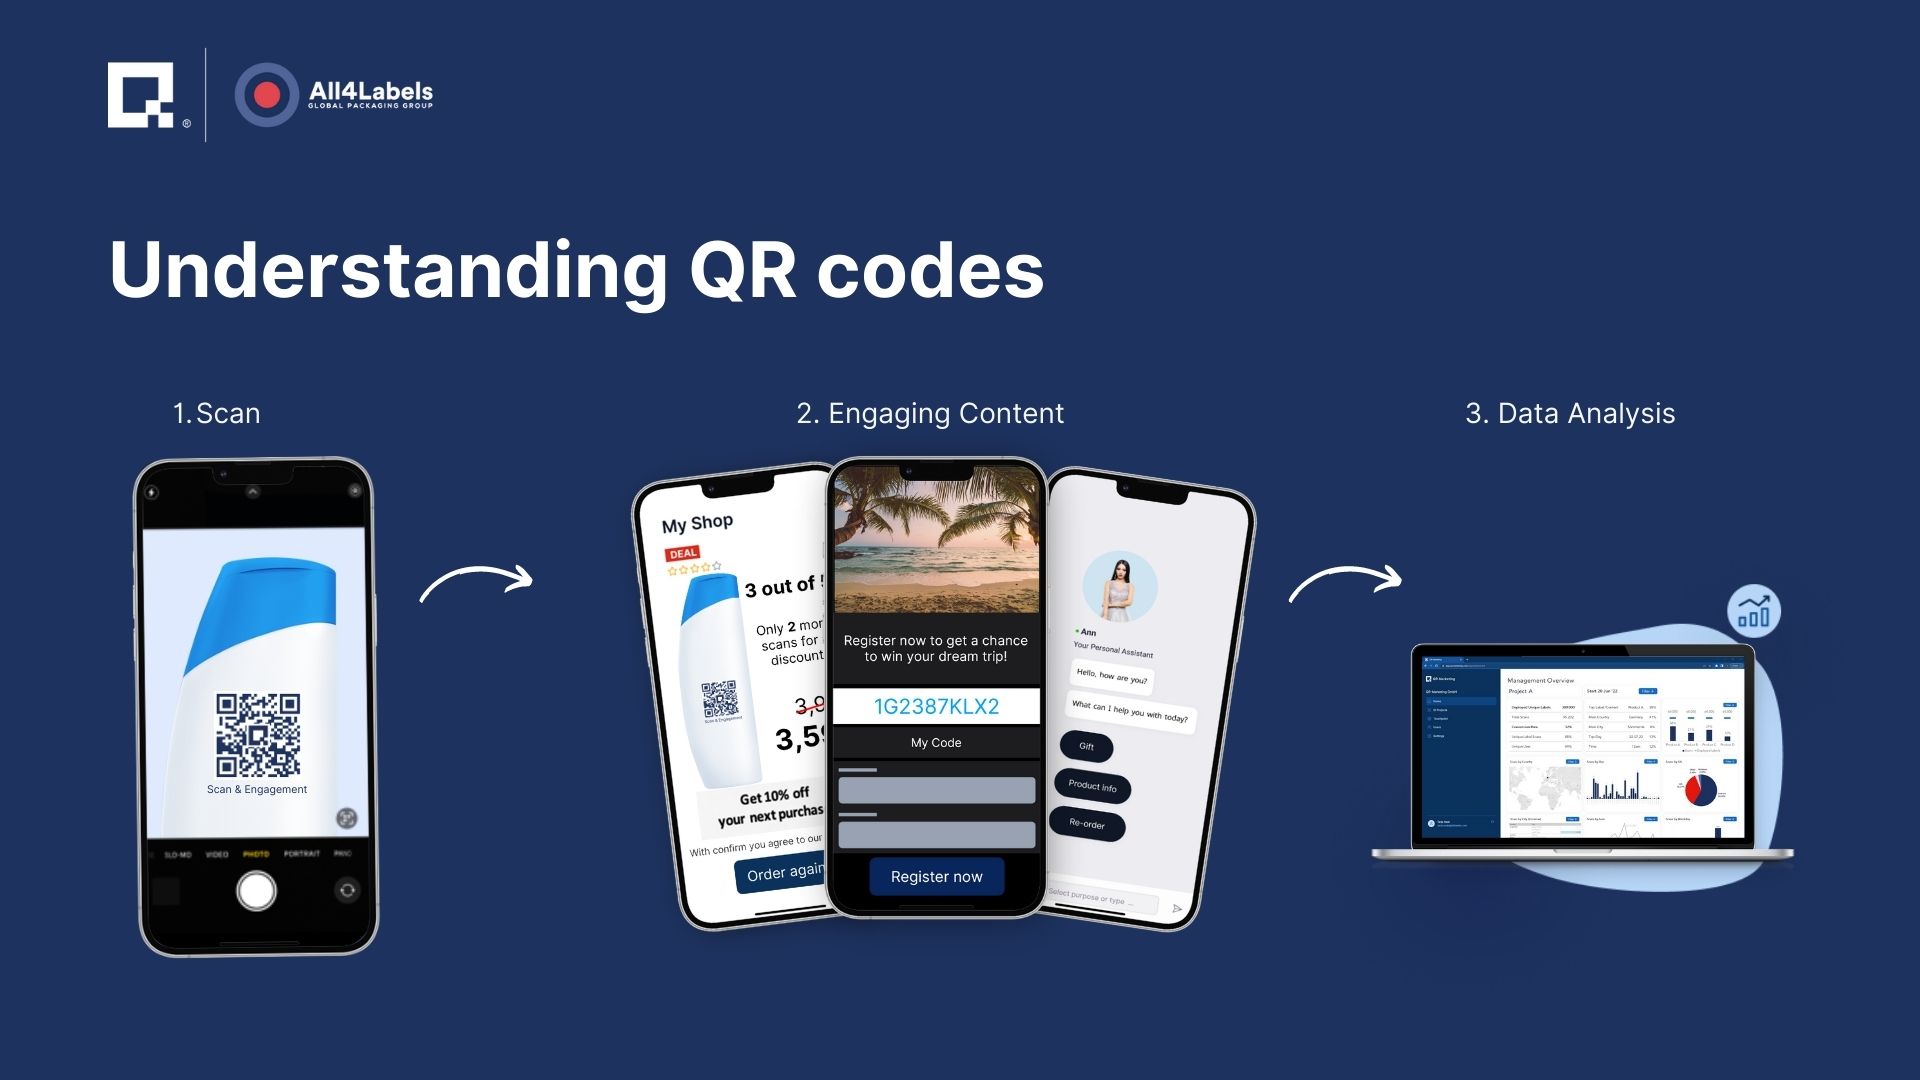 Tipps and Tricks for QR Codes